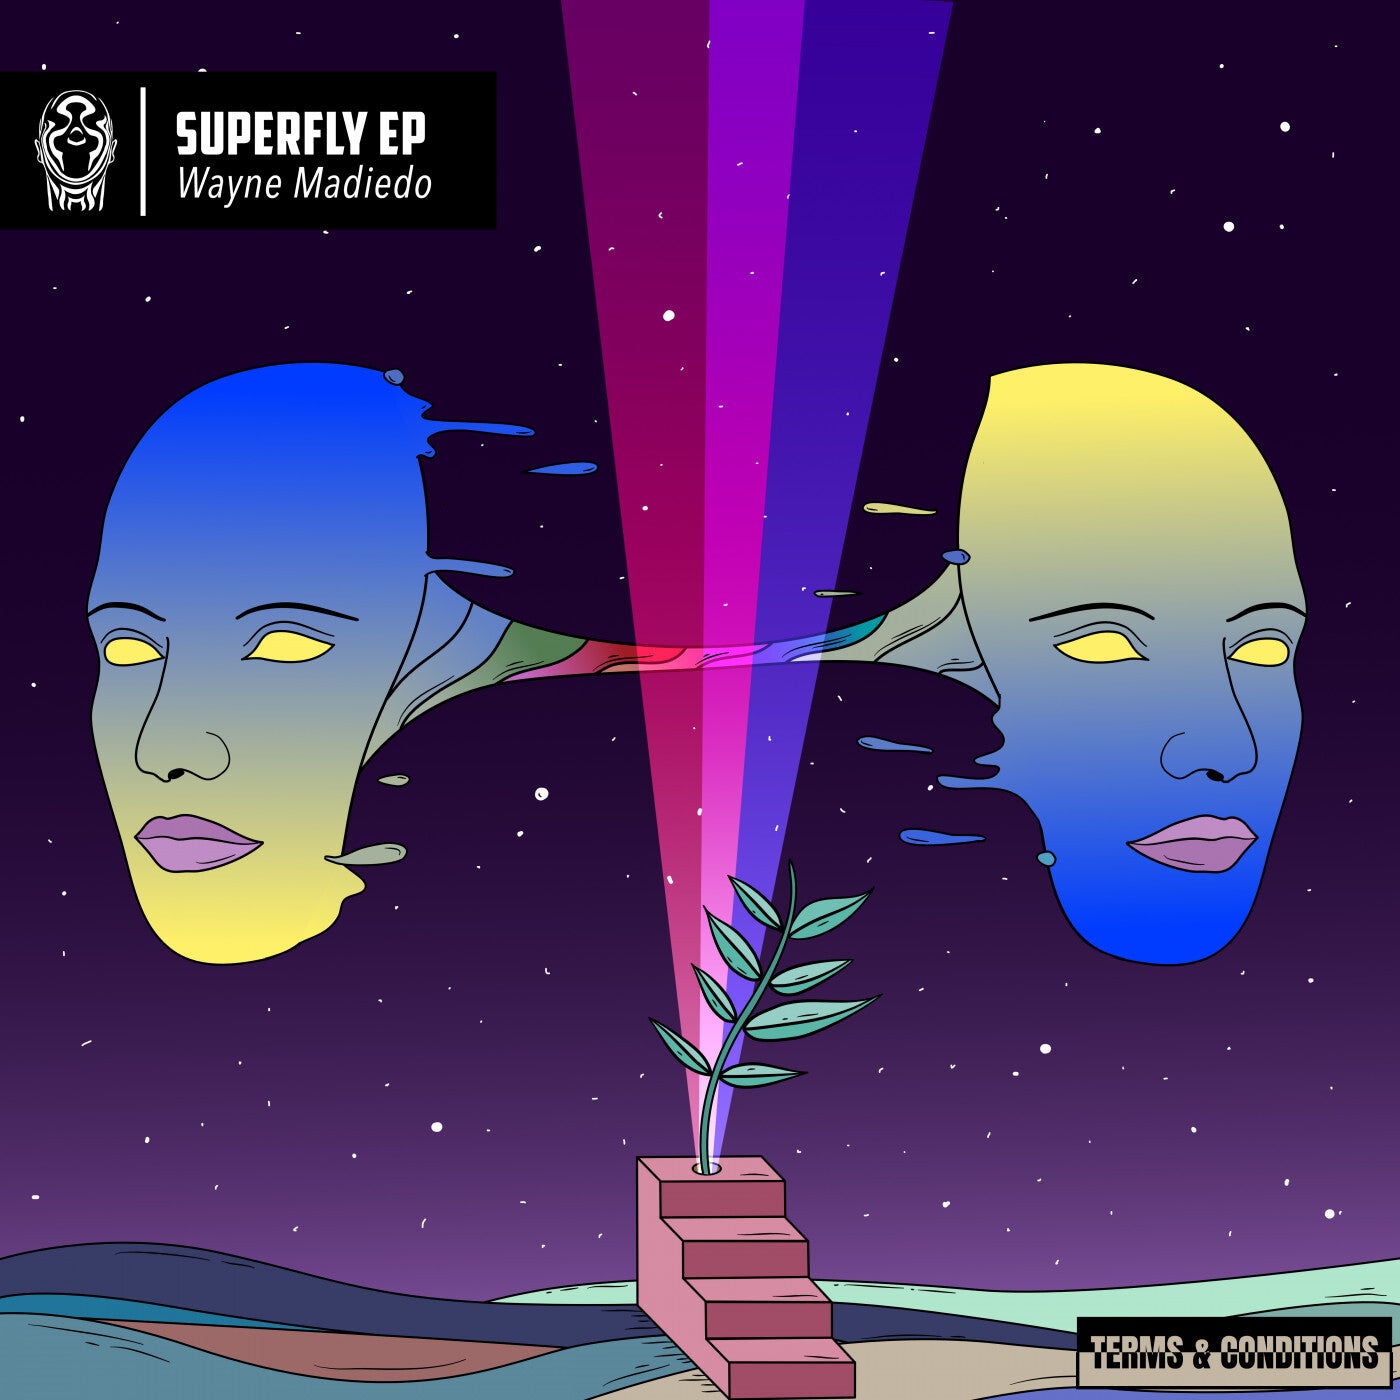 Superfly EP